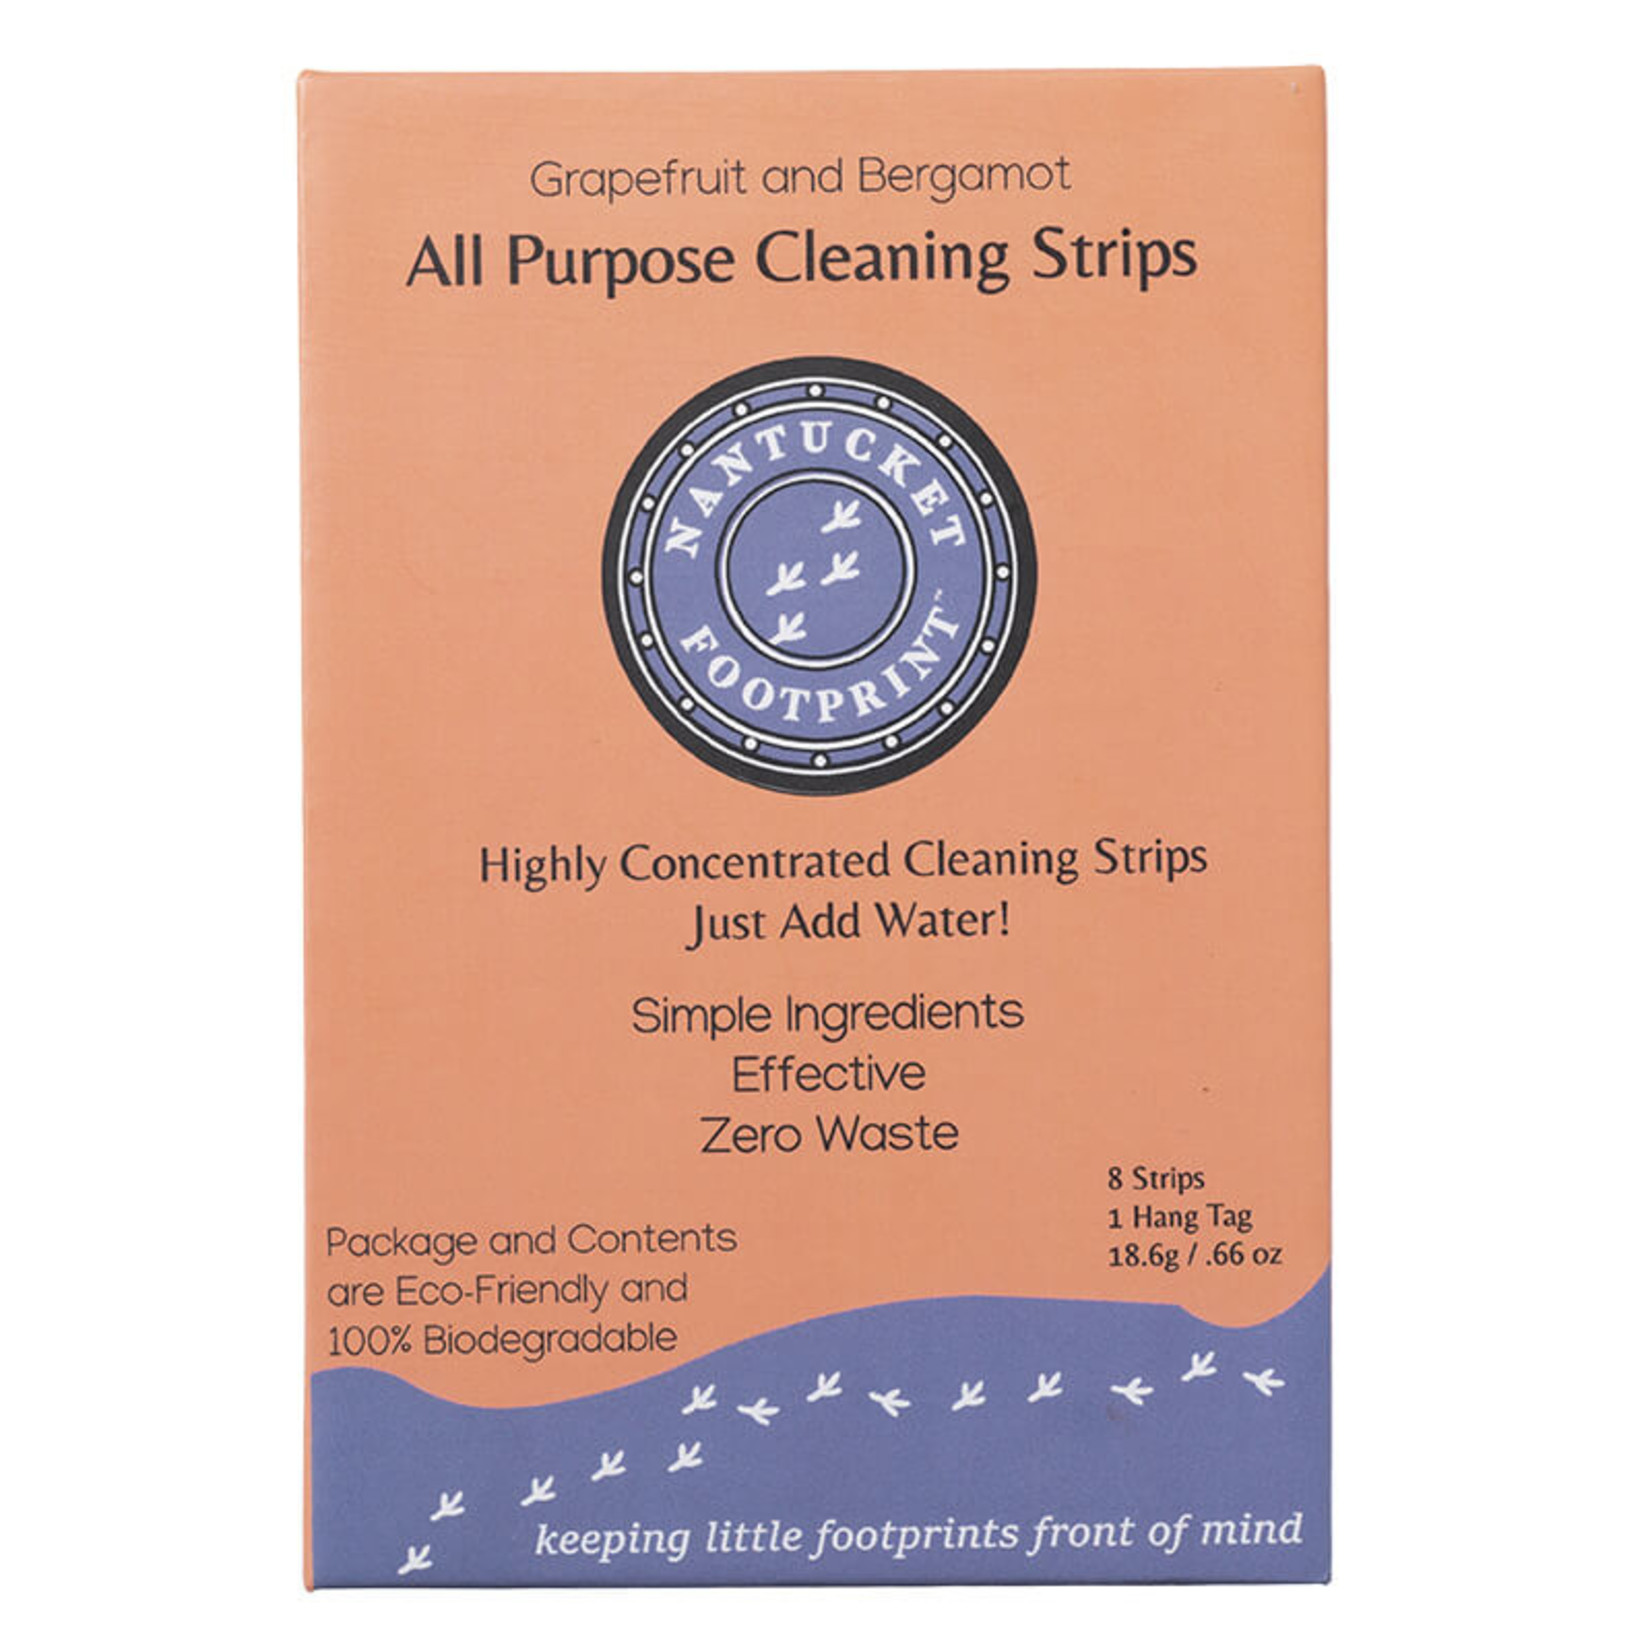 Nantucket Spider Nantucket Spider - All Purpose Cleaning Strips